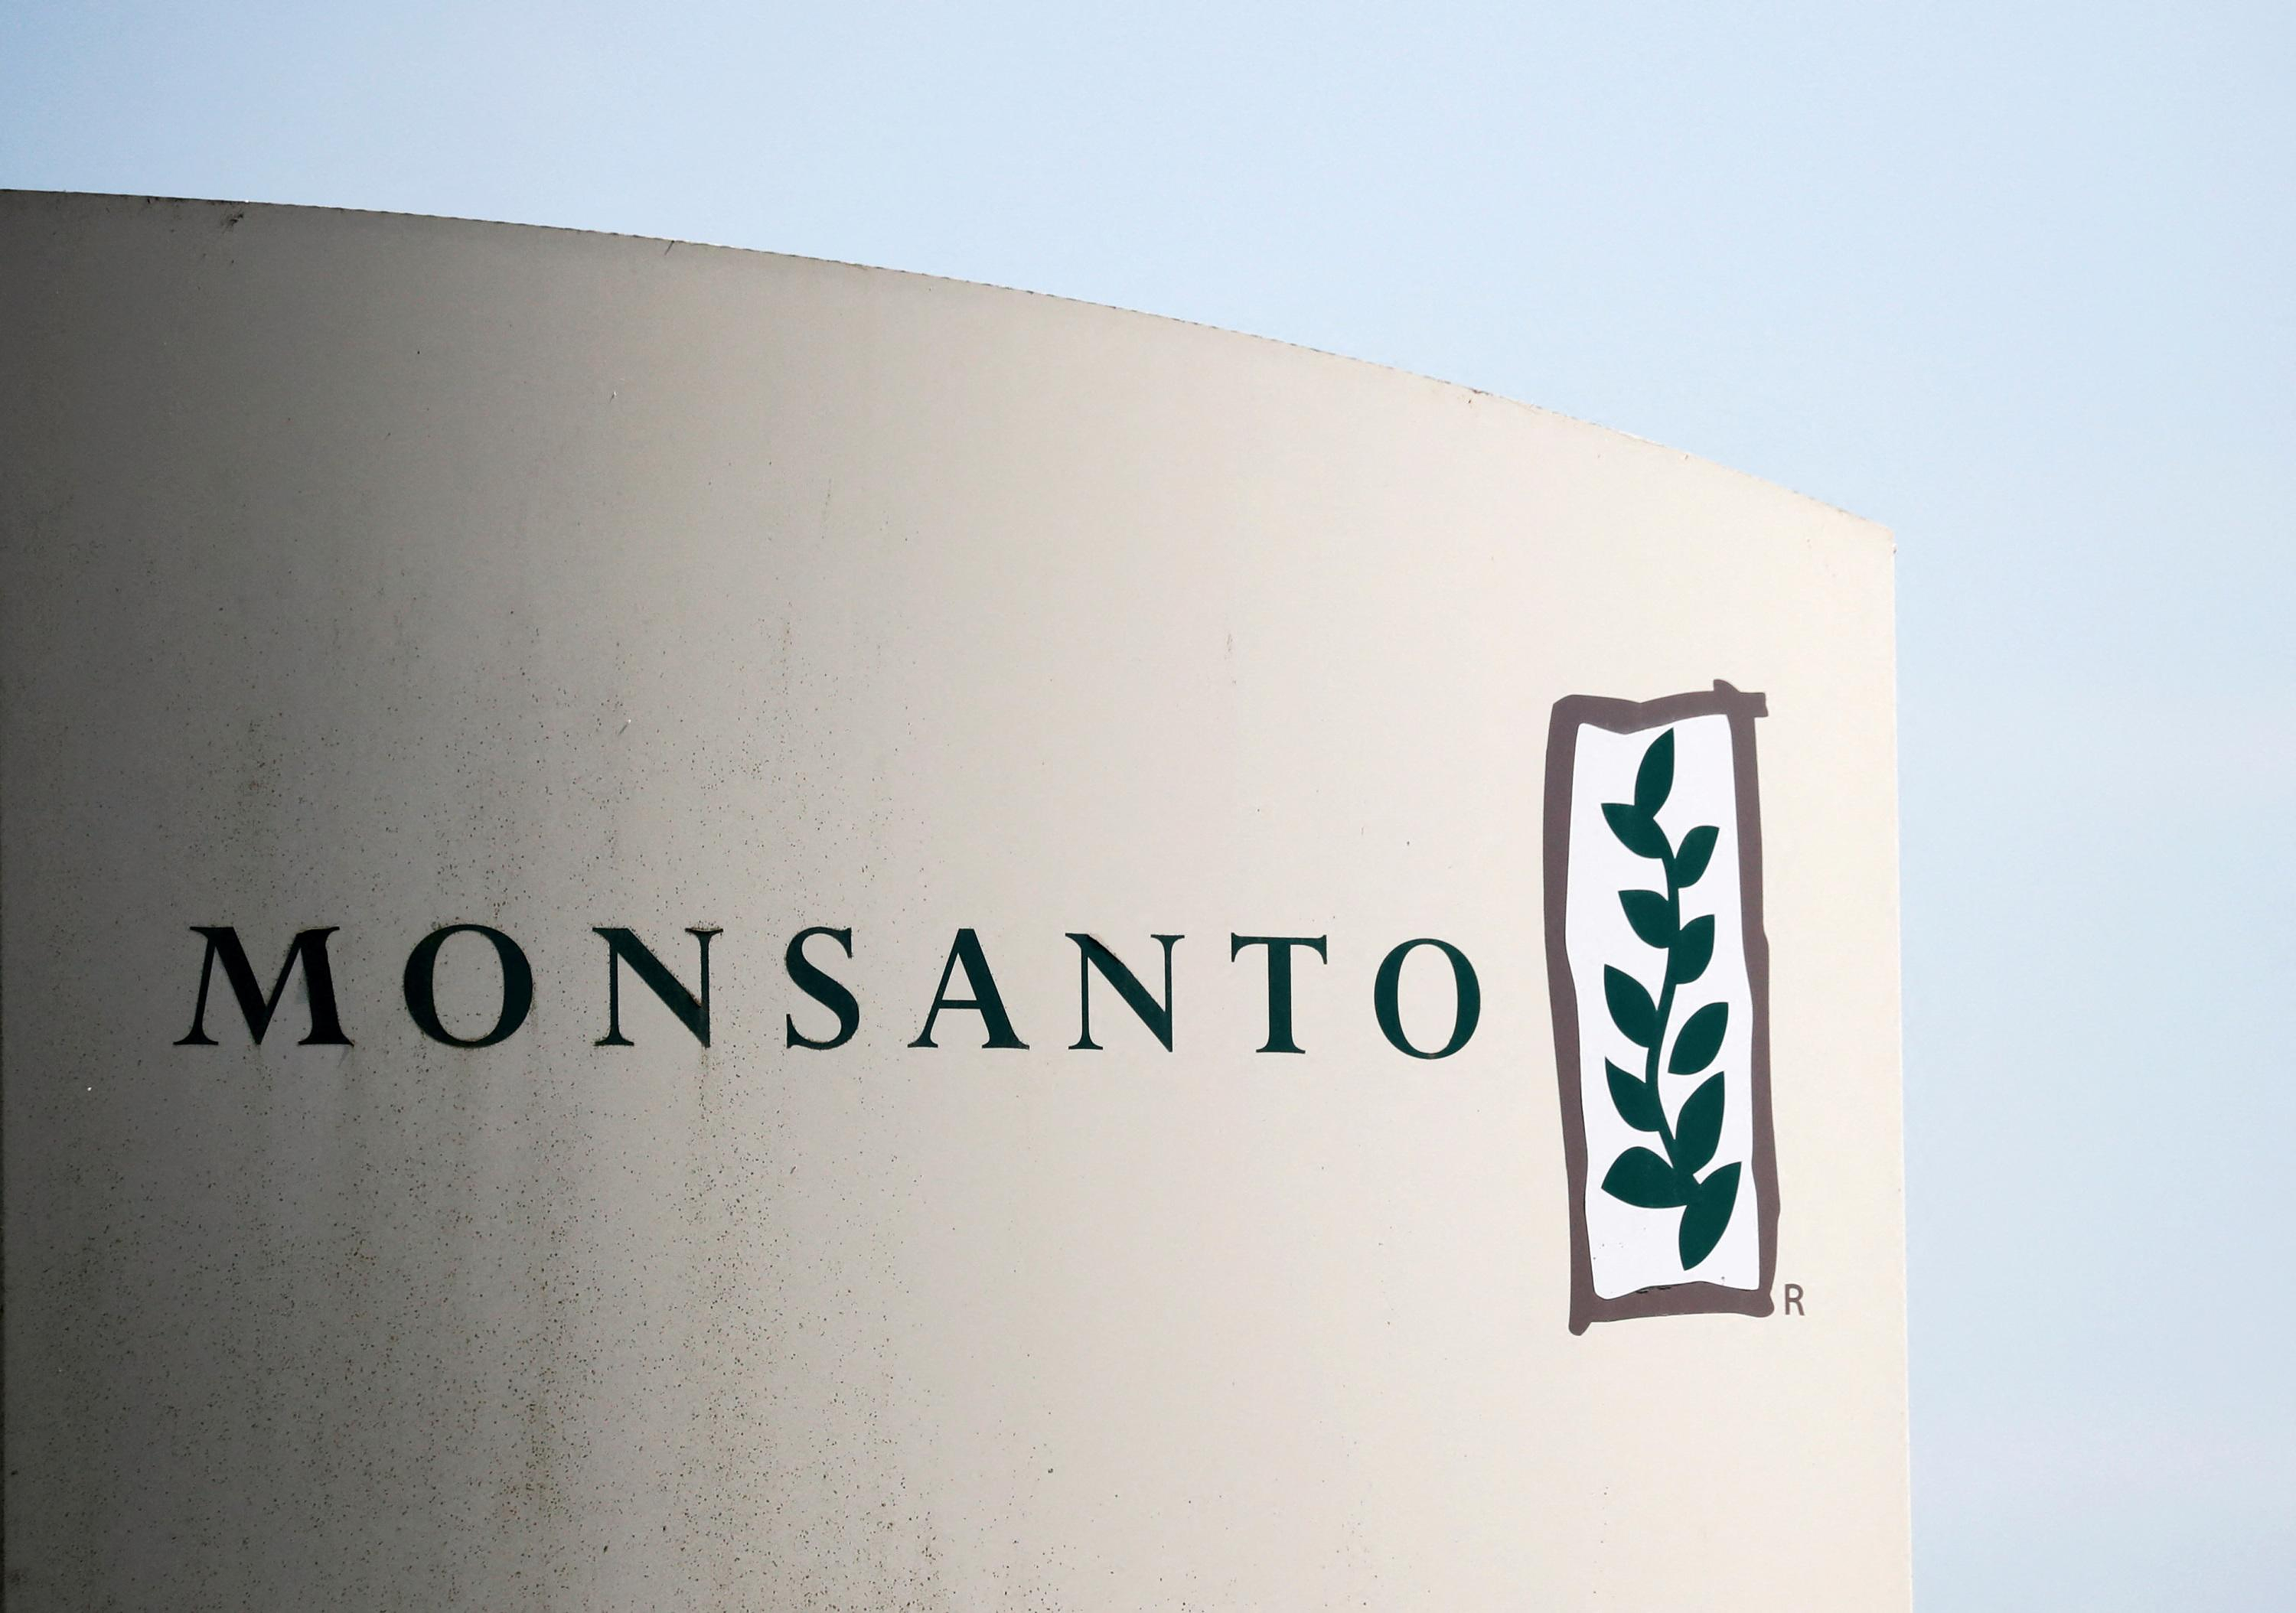 Monsanto ordered to pay $857 million for exposure to PCB pollutants